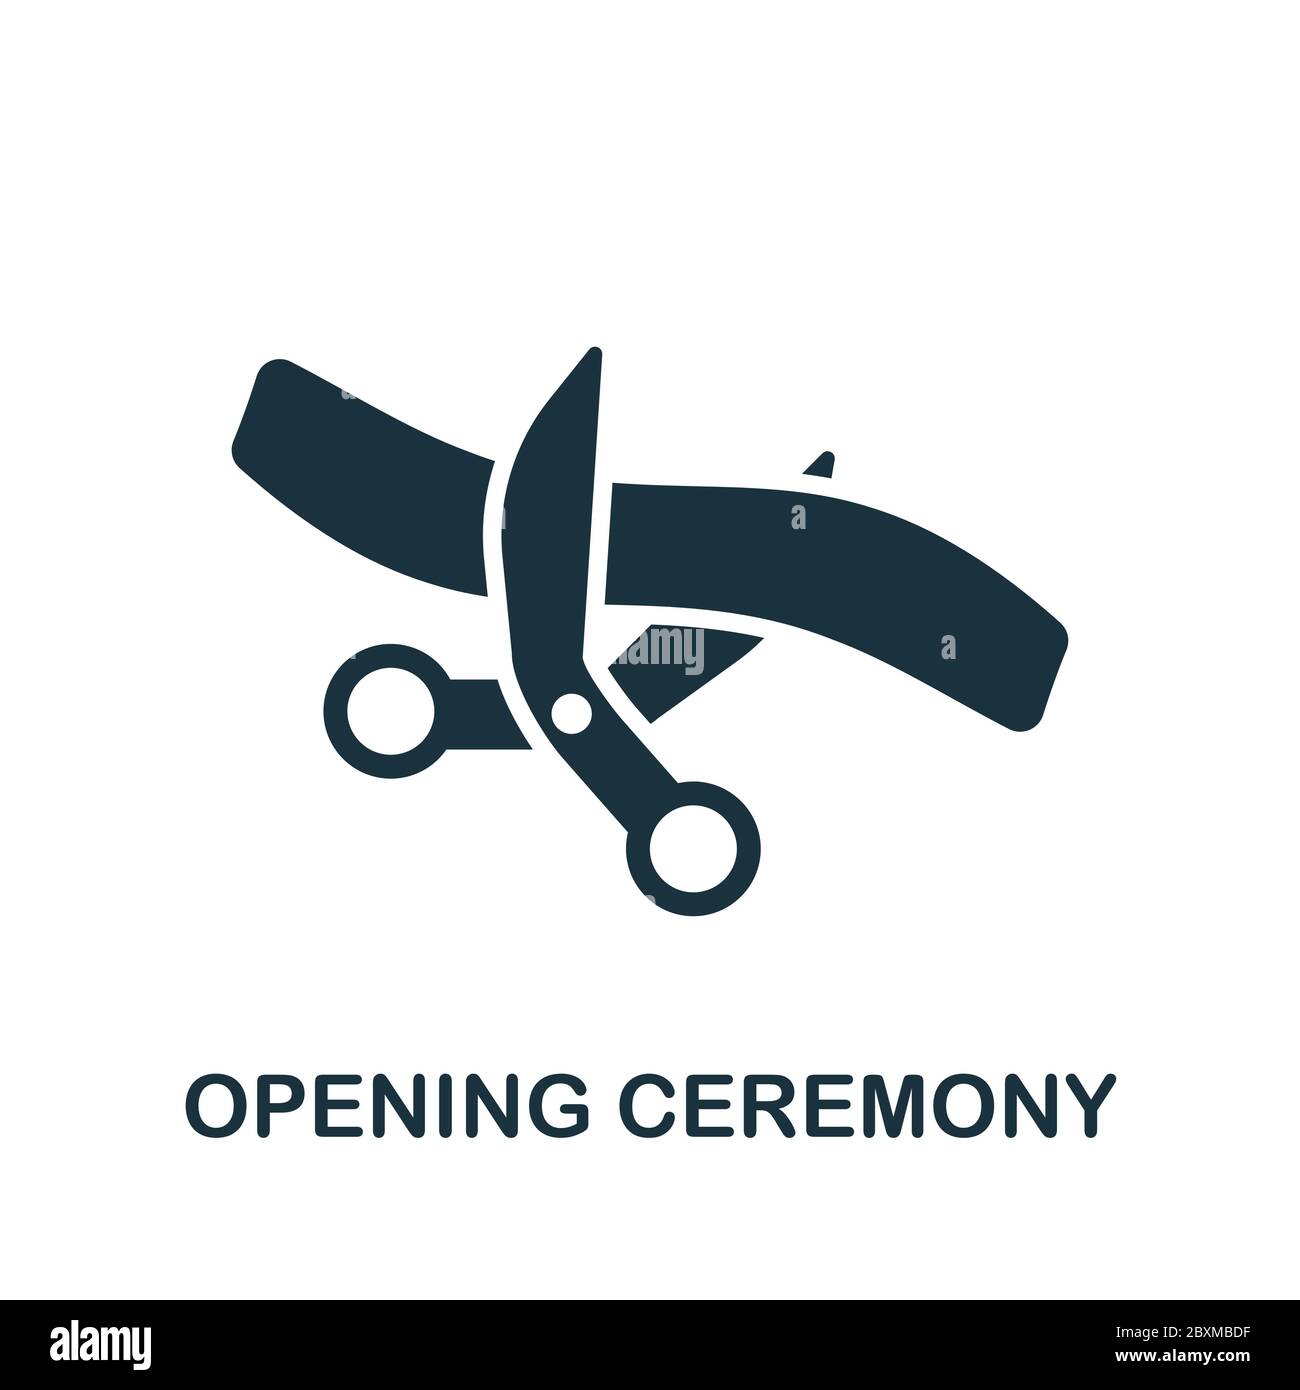 Opening ceremony png images | PNGEgg